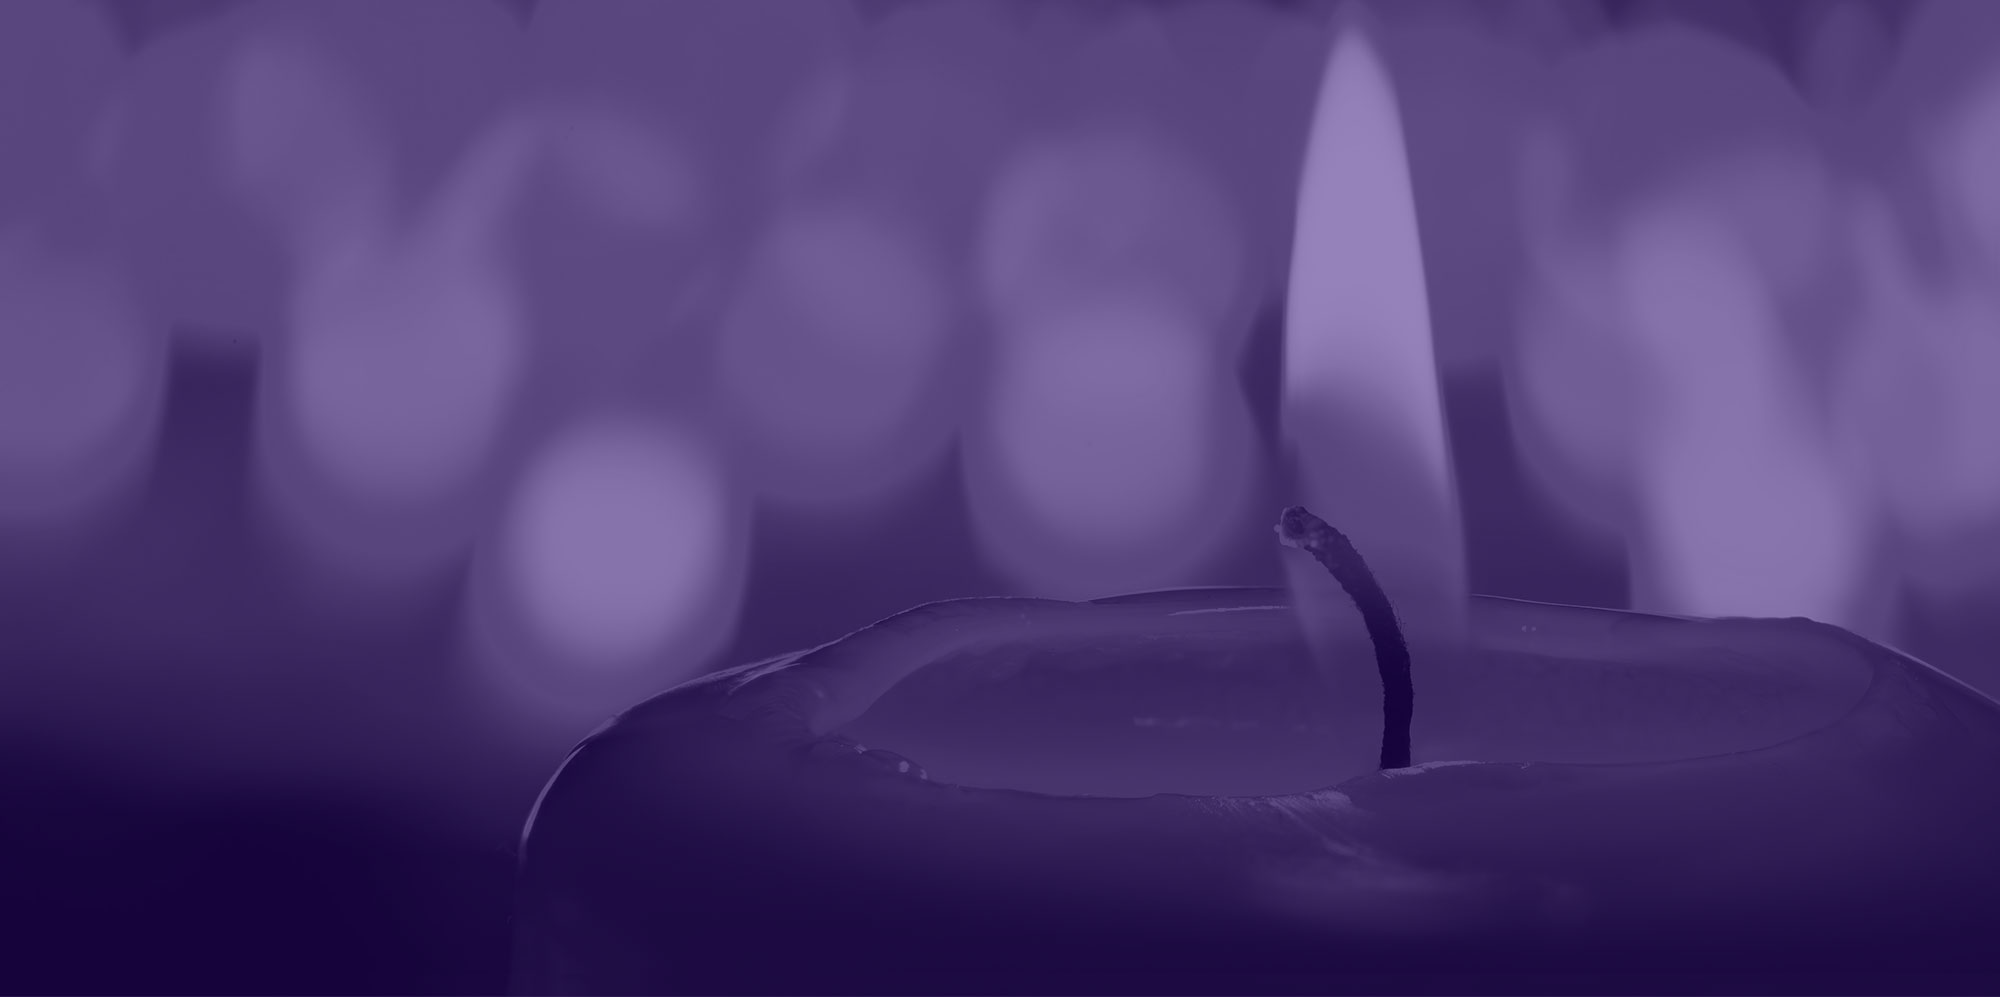 Blurred Candles